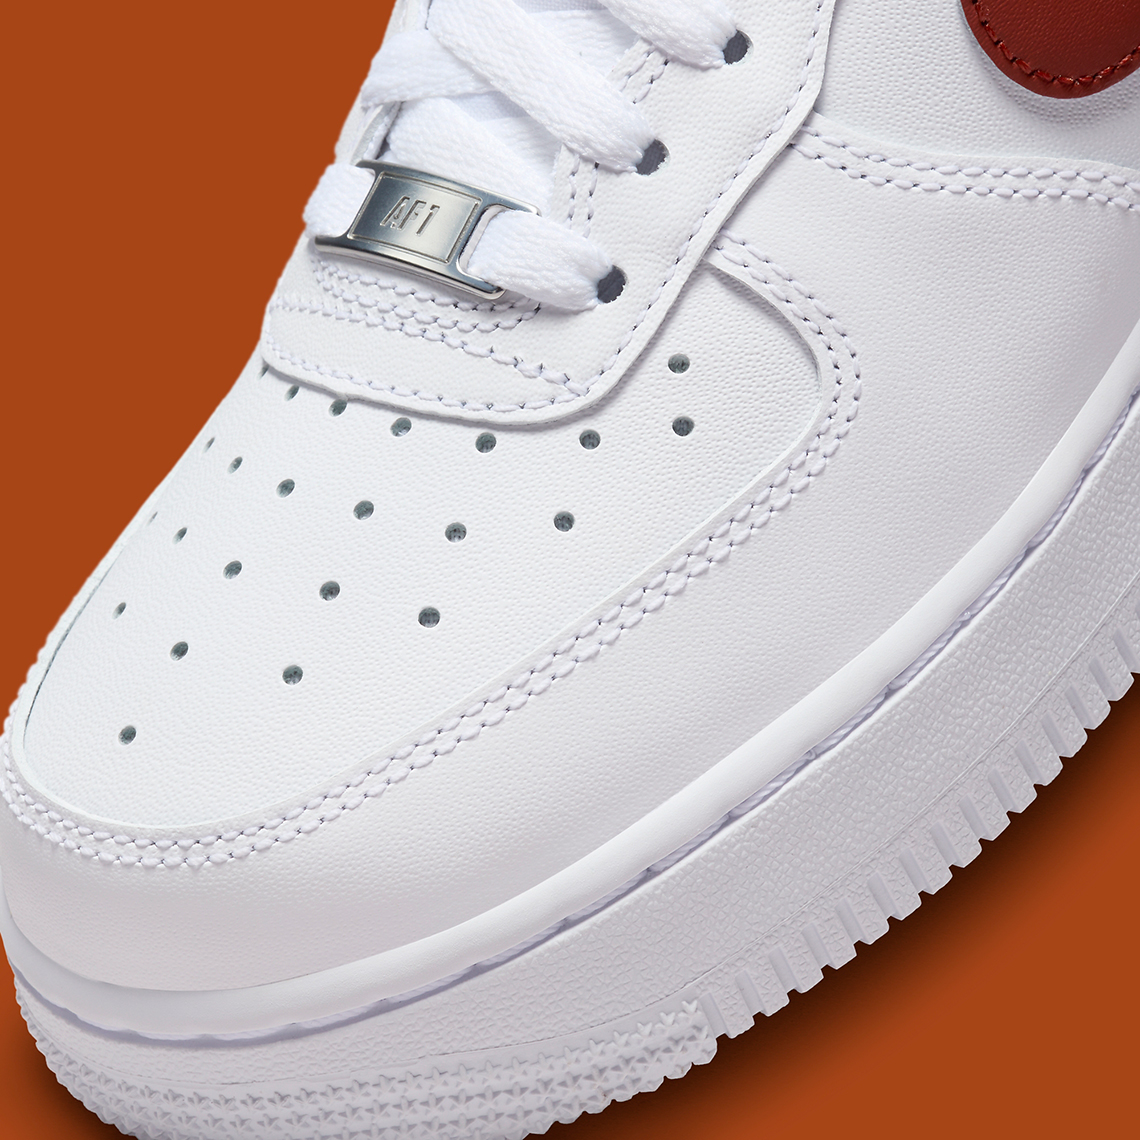 nike air force 1 low flyease white rugged orange dx5883 102 8